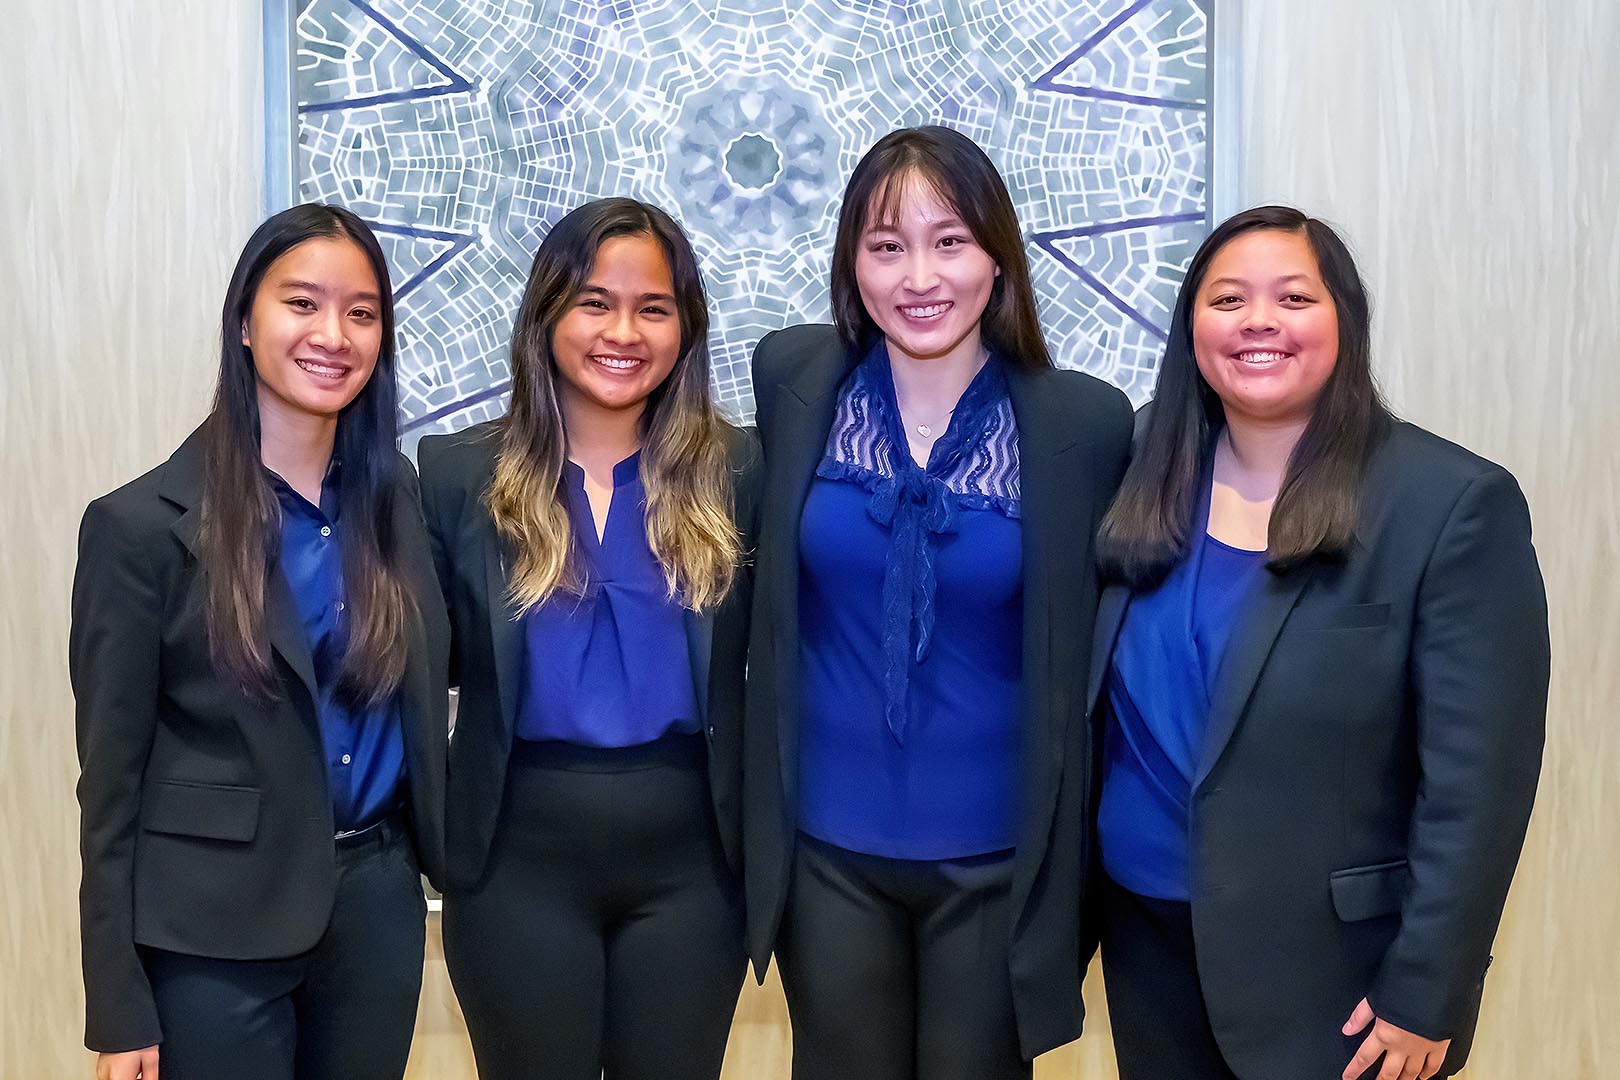 Winners of the 2022 Student Case Competition